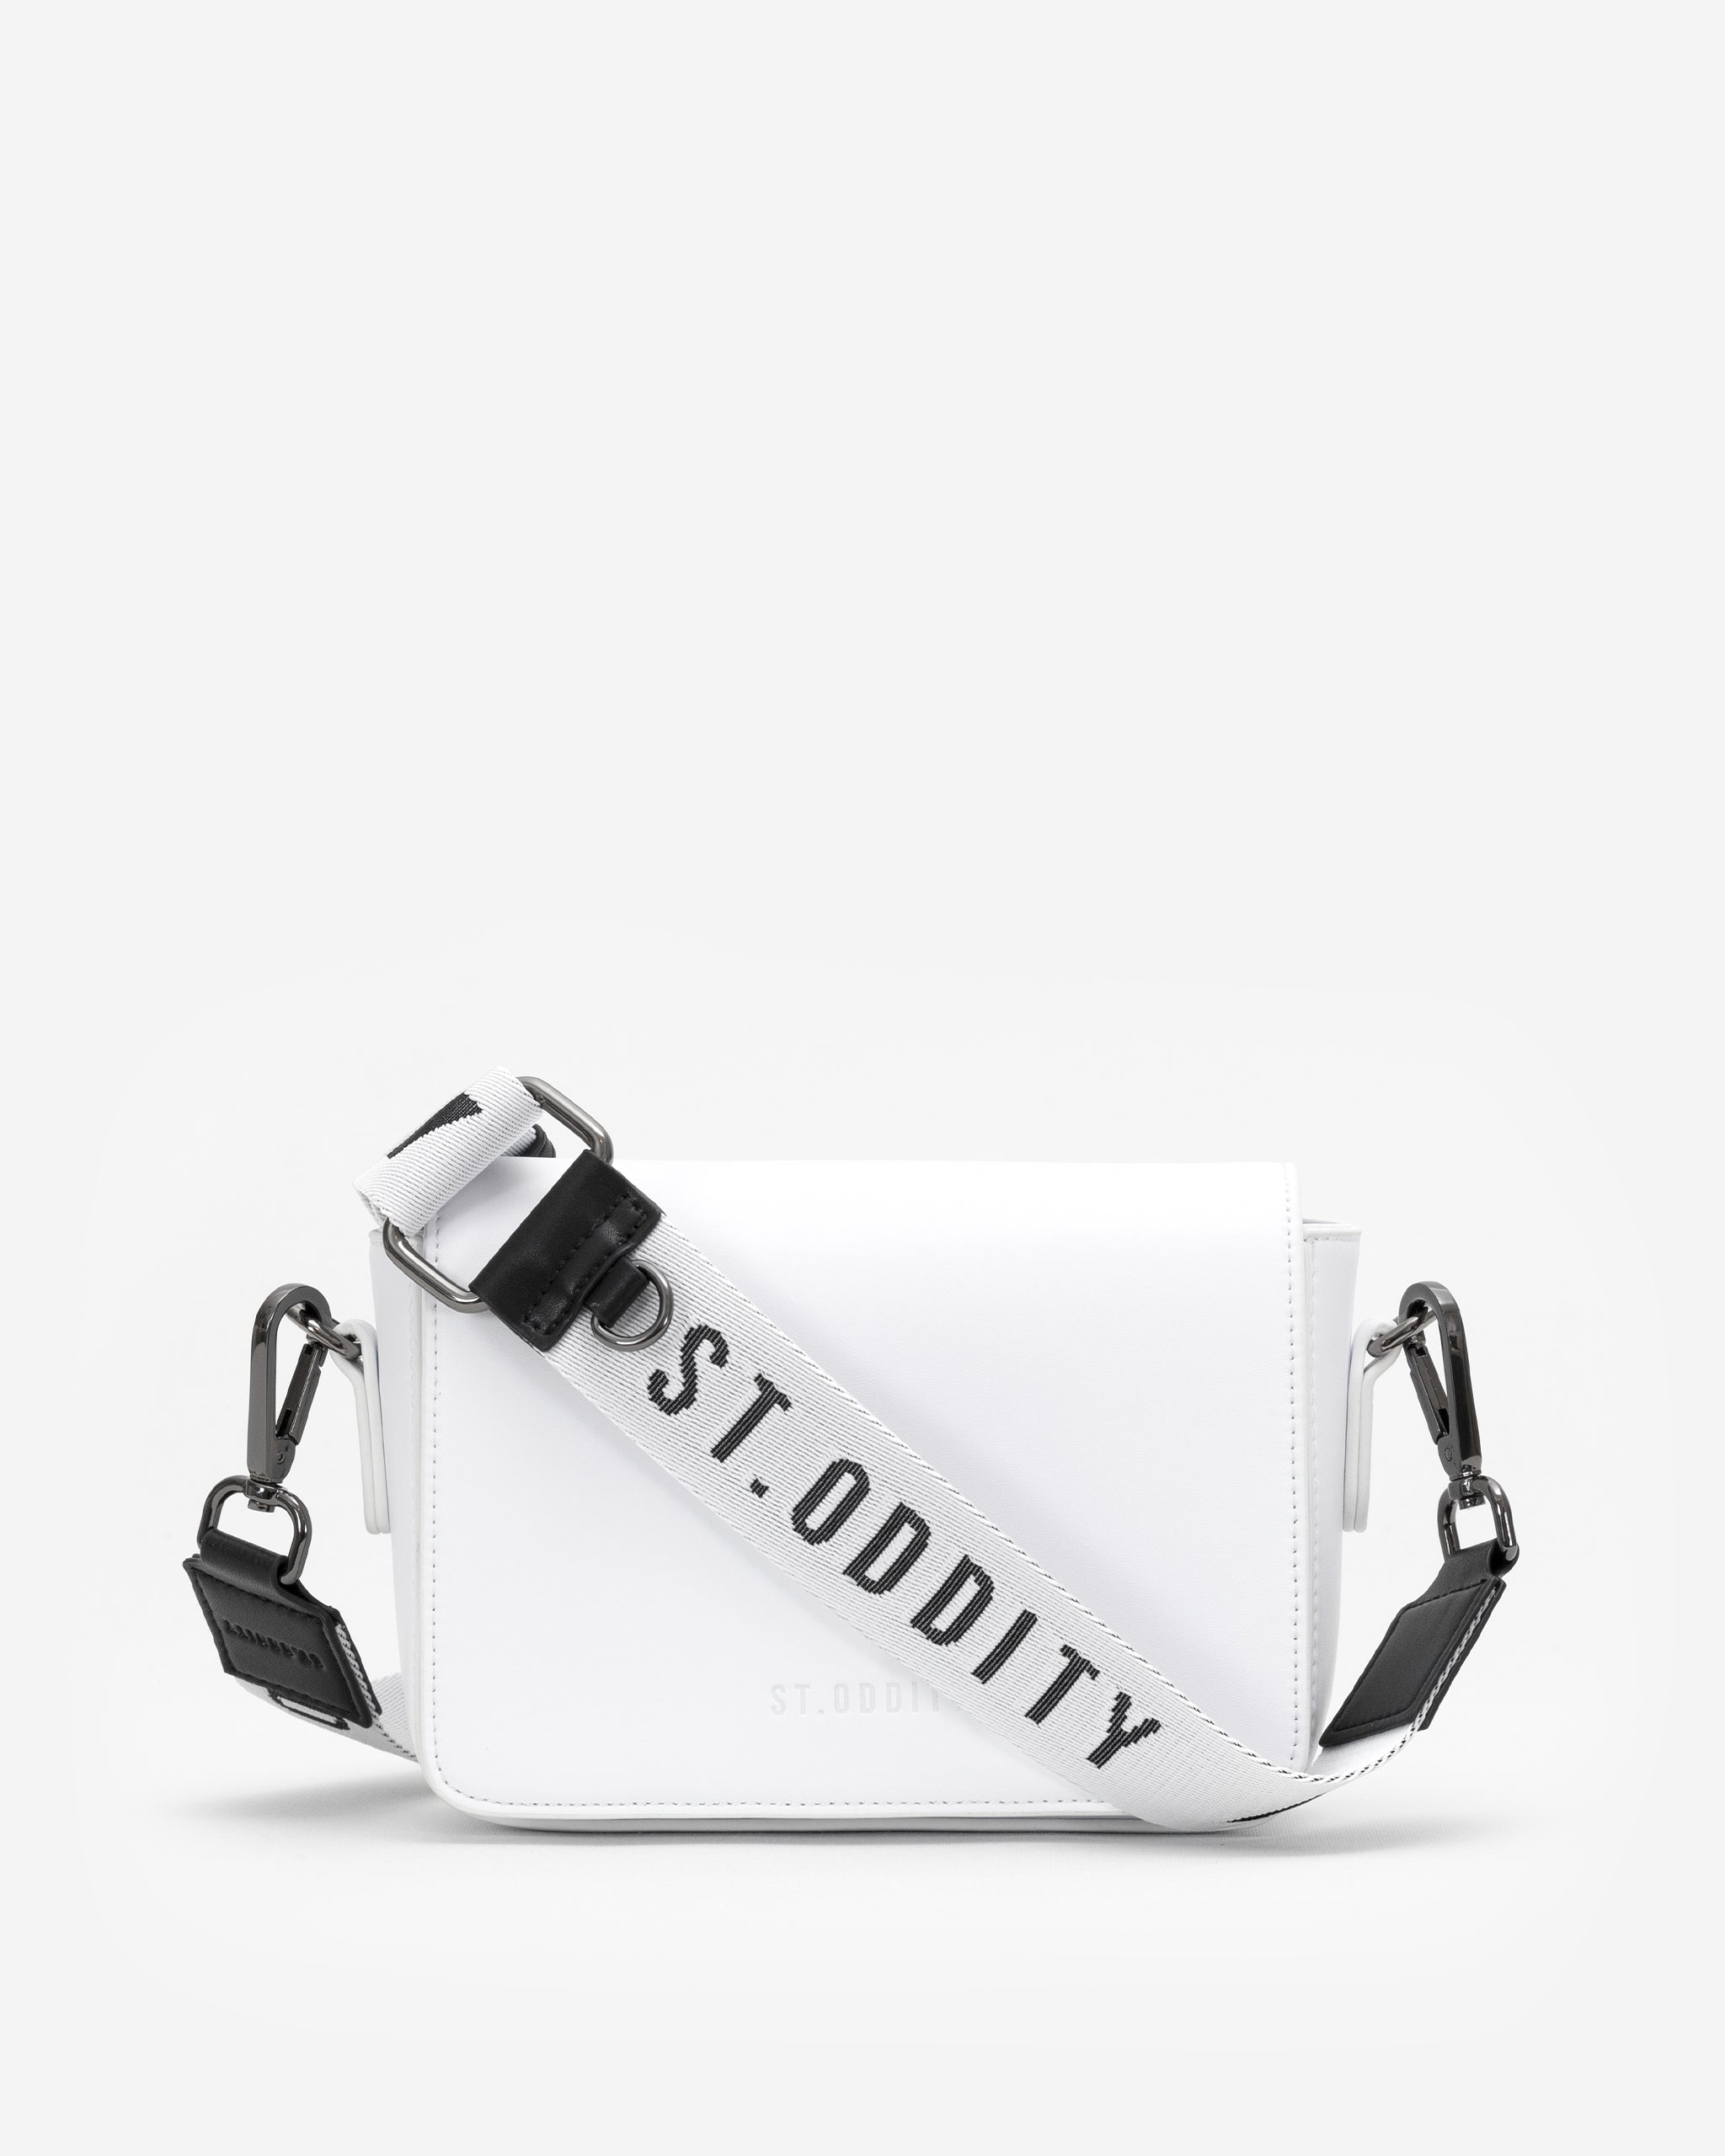 Pre-order (Mid-December): Crossbody Bag with Street Strap in White